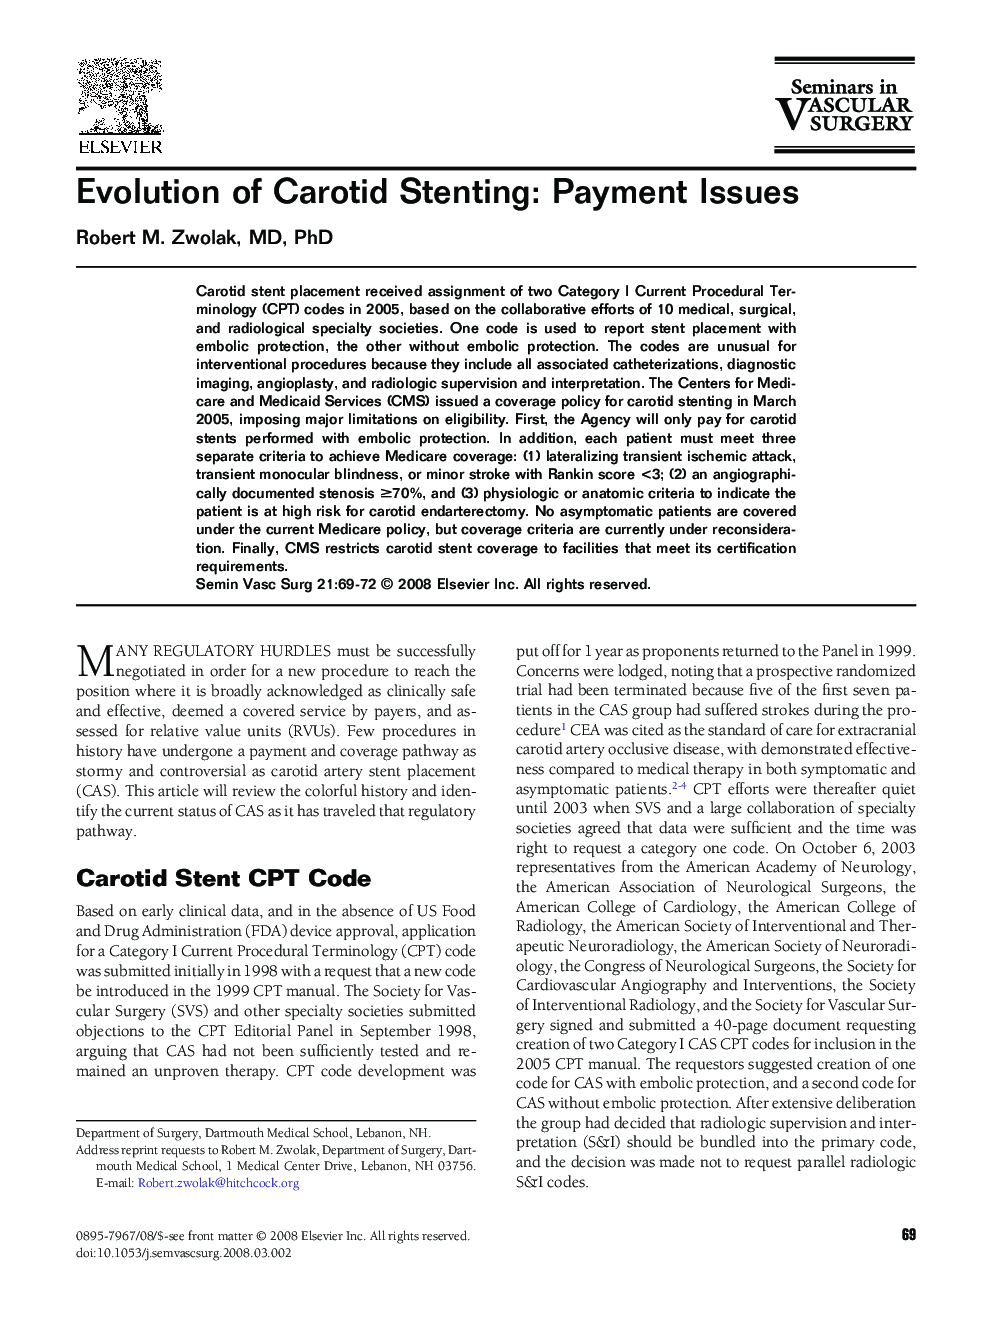 Evolution of Carotid Stenting: Payment Issues